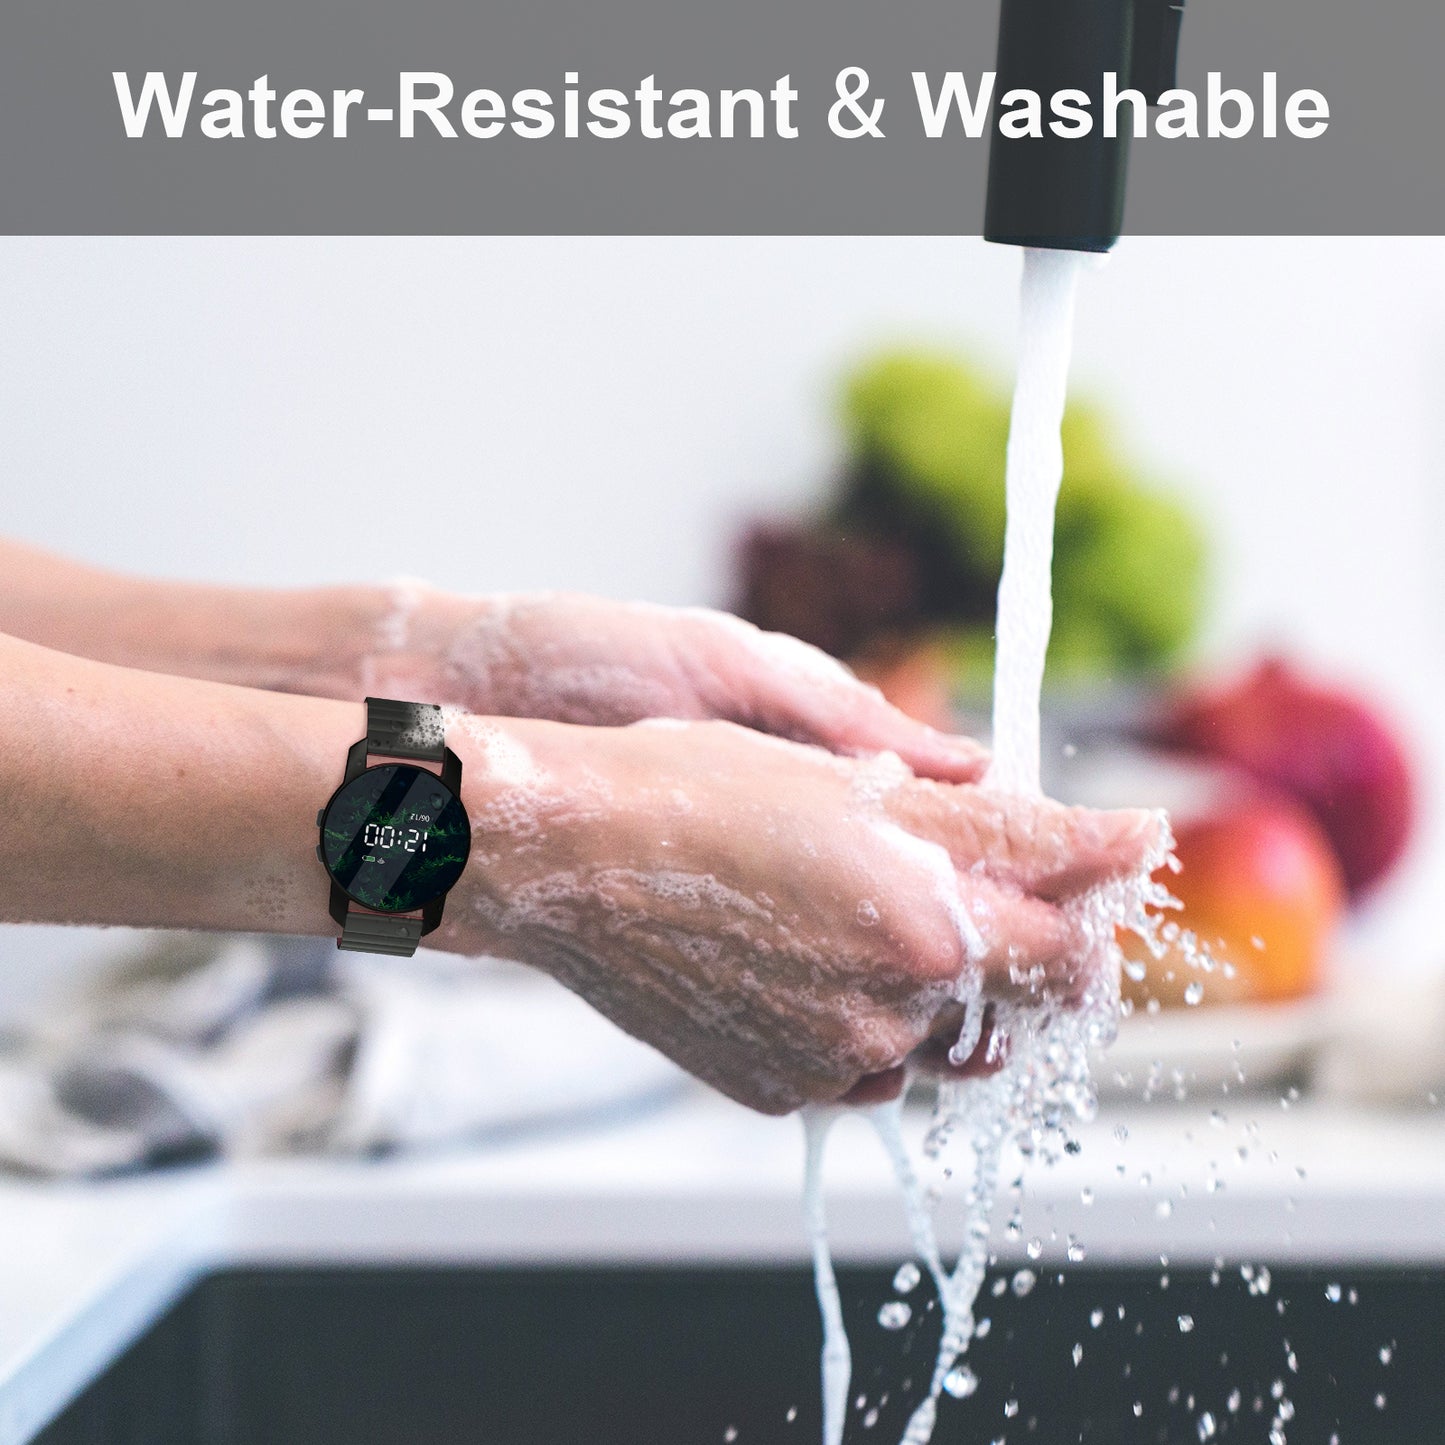 Water-Resistant & Washable